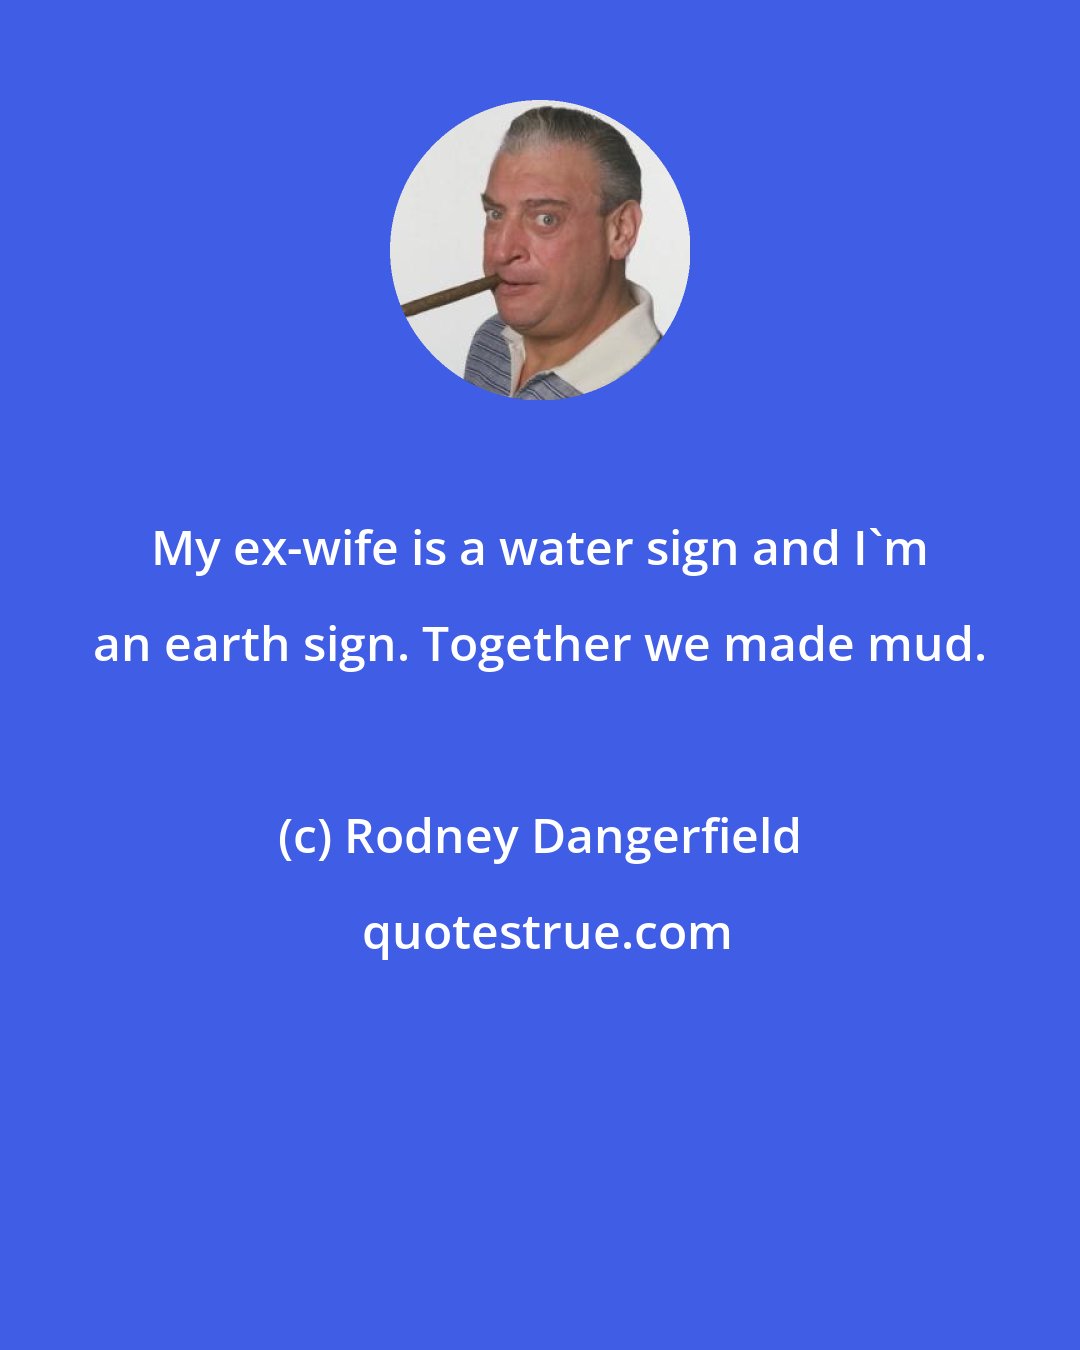 Rodney Dangerfield: My ex-wife is a water sign and I'm an earth sign. Together we made mud.